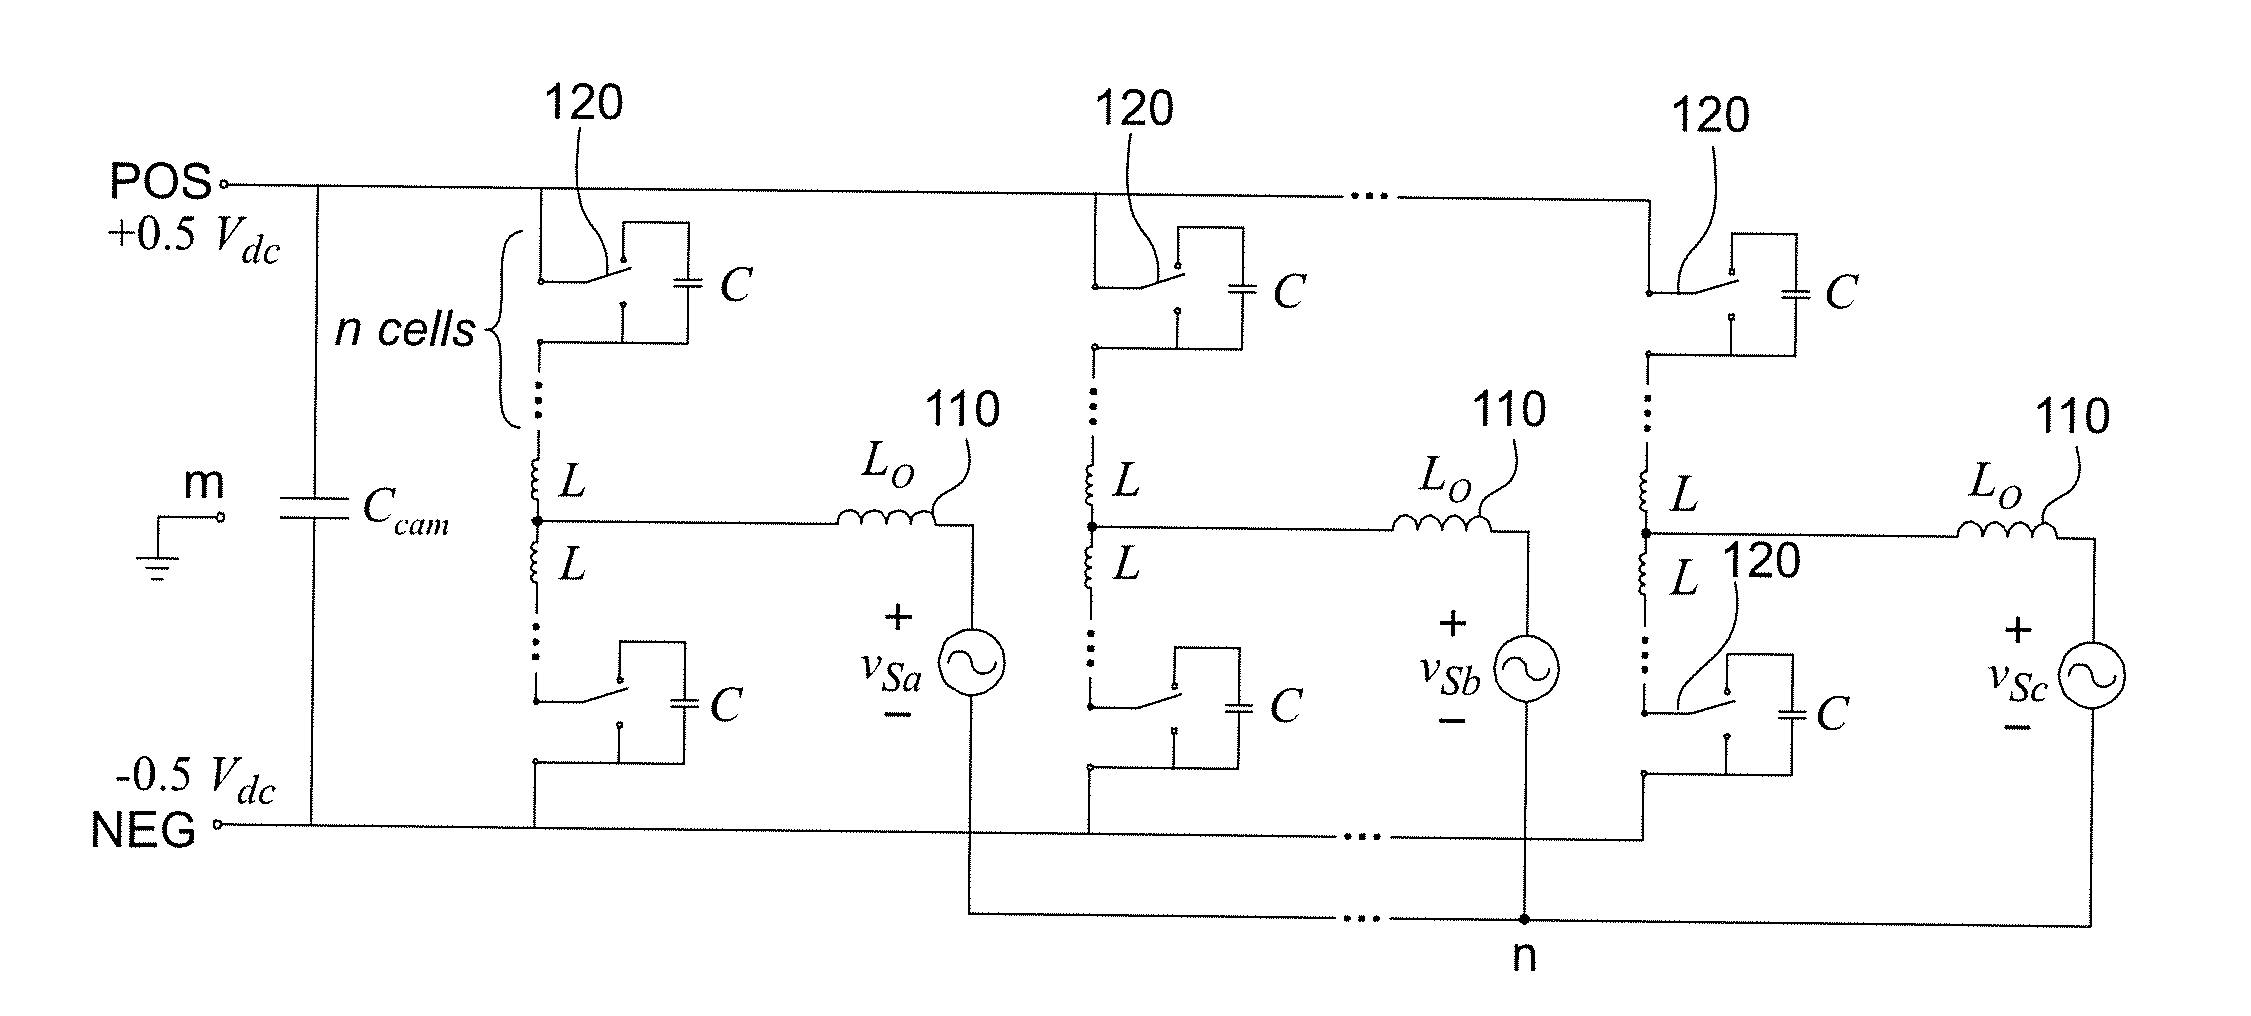 Power-Cell Switching-Cycle Capacitor Voltage Control for Modular Multi-Level Converters